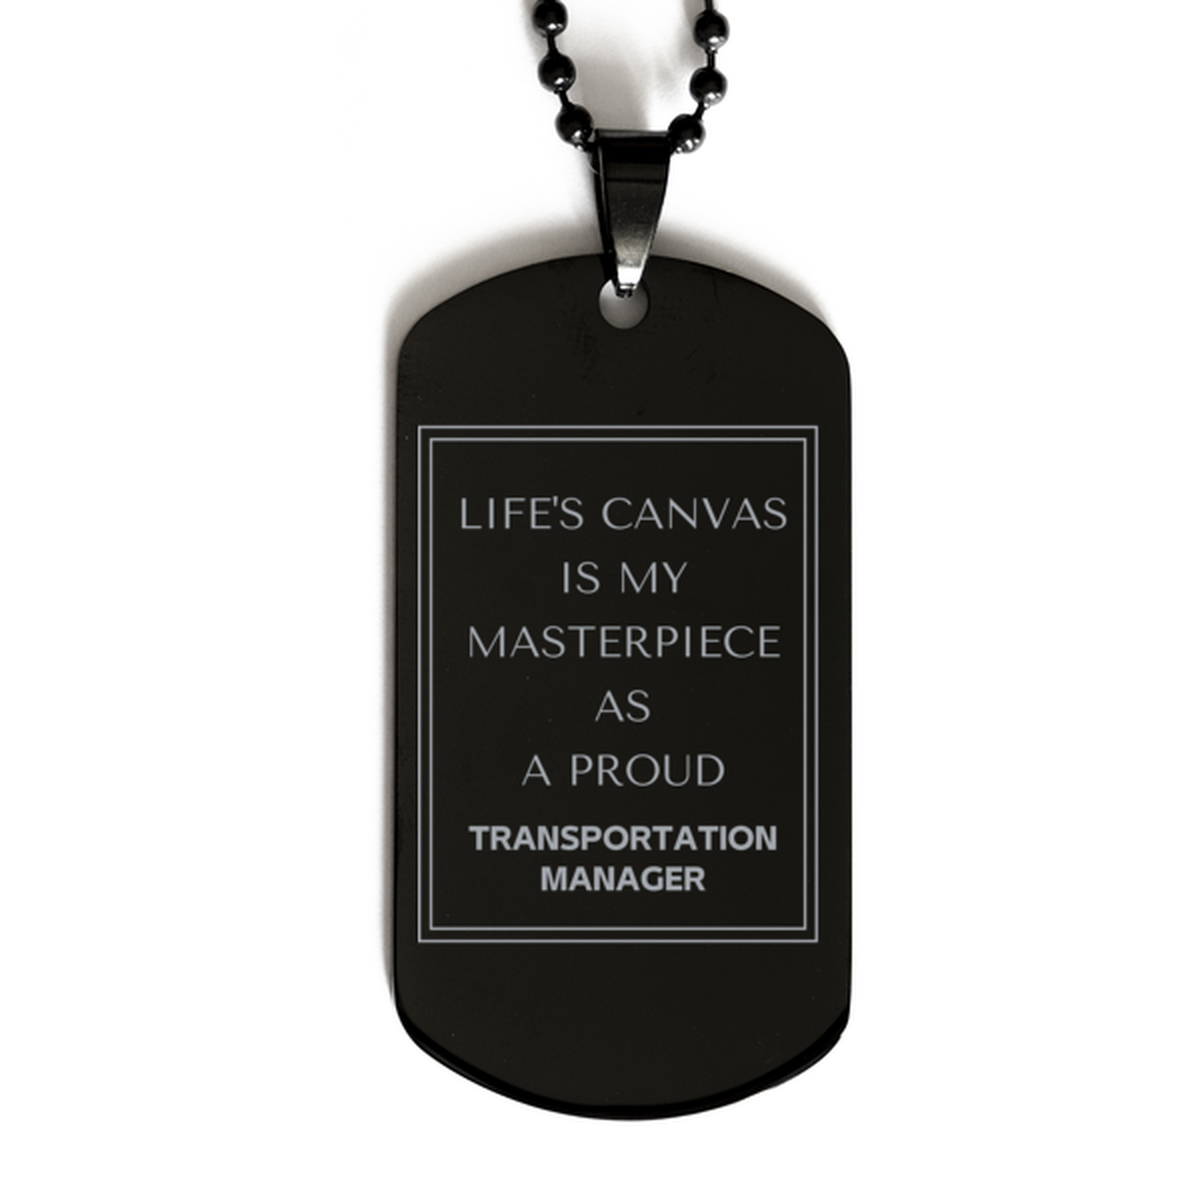 Proud Transportation Manager Gifts, Life's canvas is my masterpiece, Epic Birthday Christmas Unique Black Dog Tag For Transportation Manager, Coworkers, Men, Women, Friends